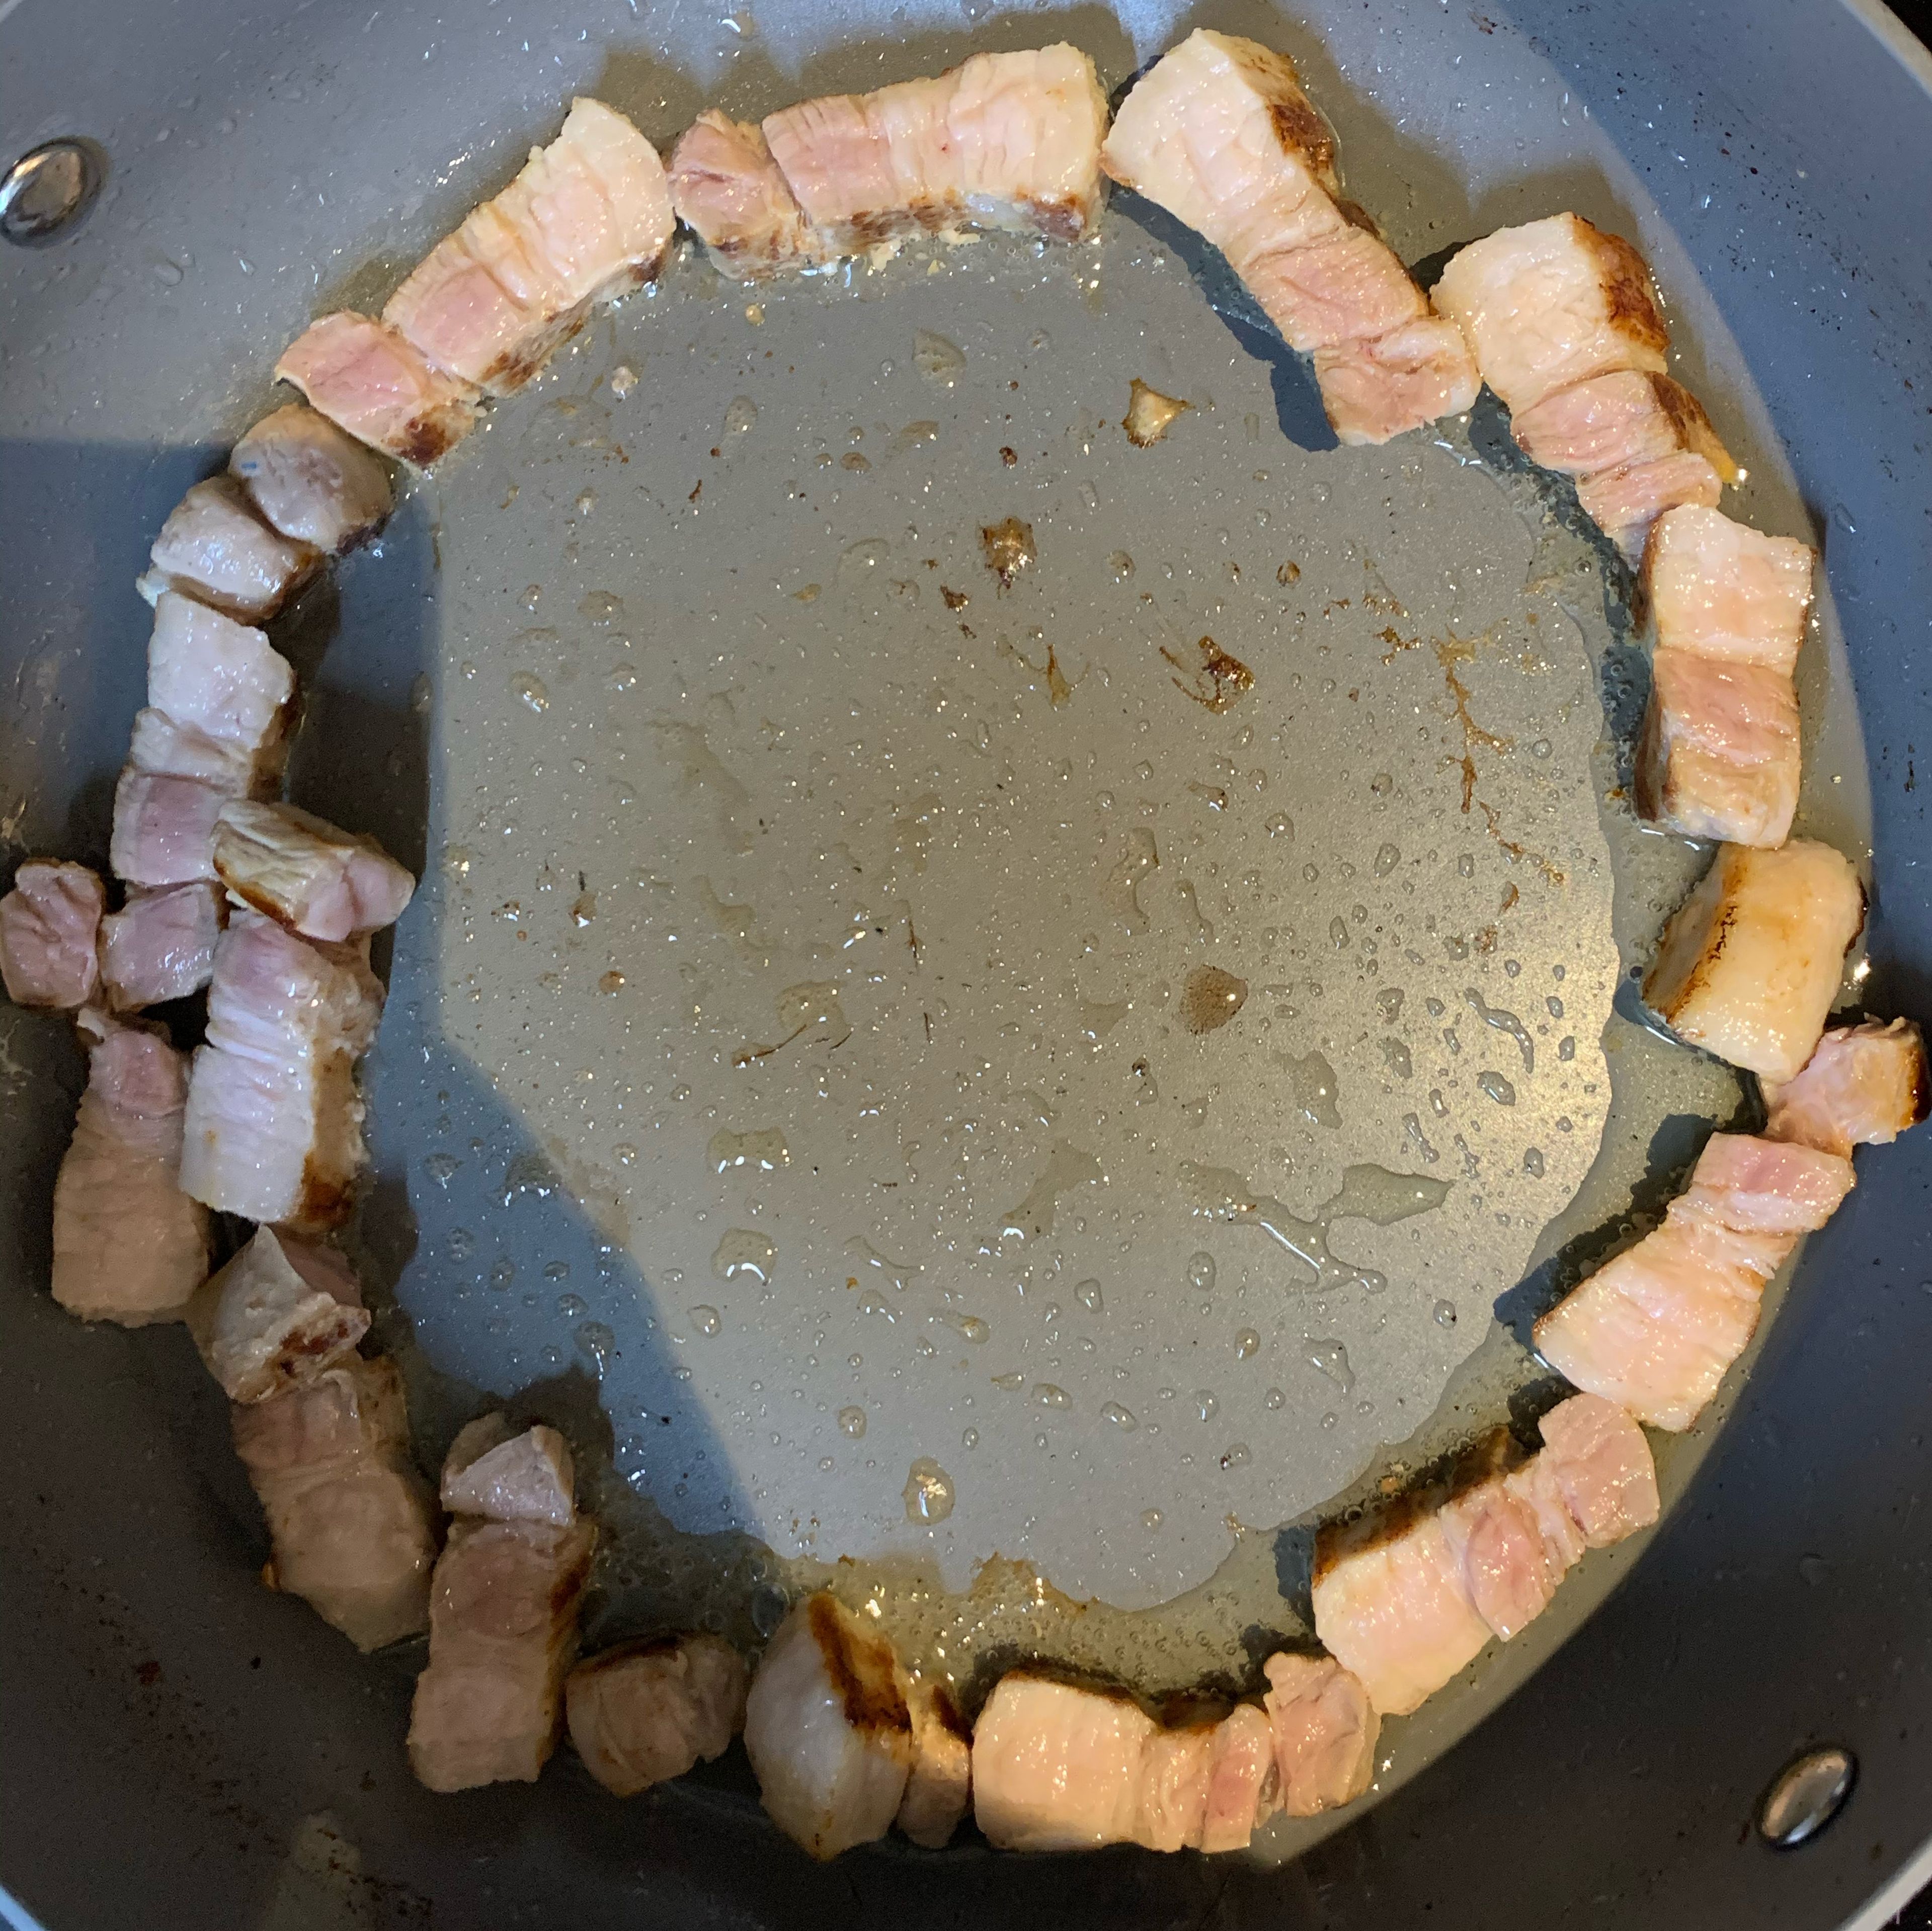 Grill the diced pork belly again on a frying pan.